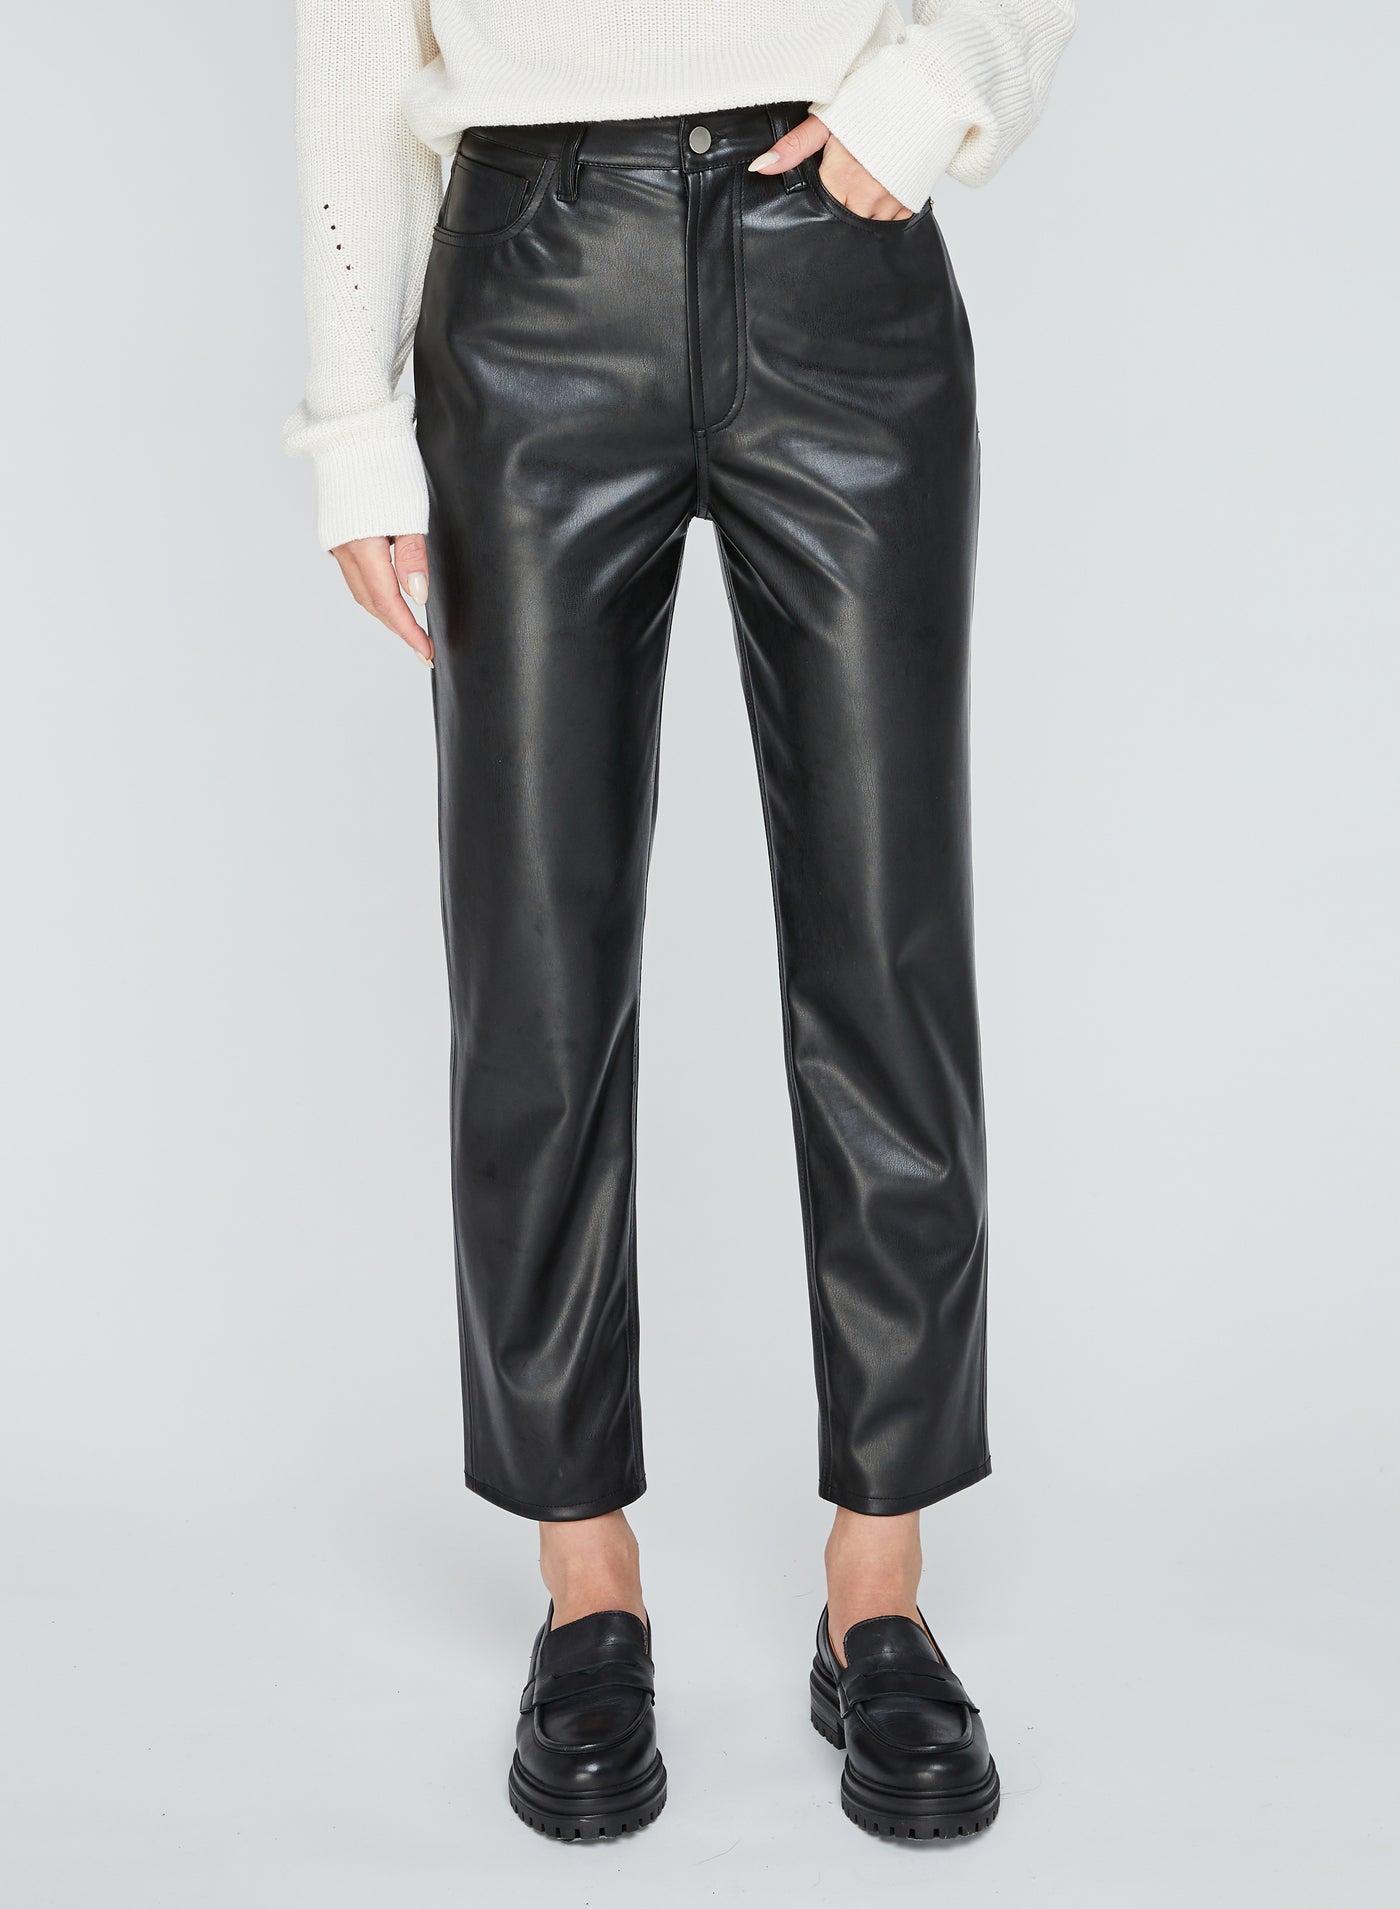 Faux Leather Crop Pants for fall.